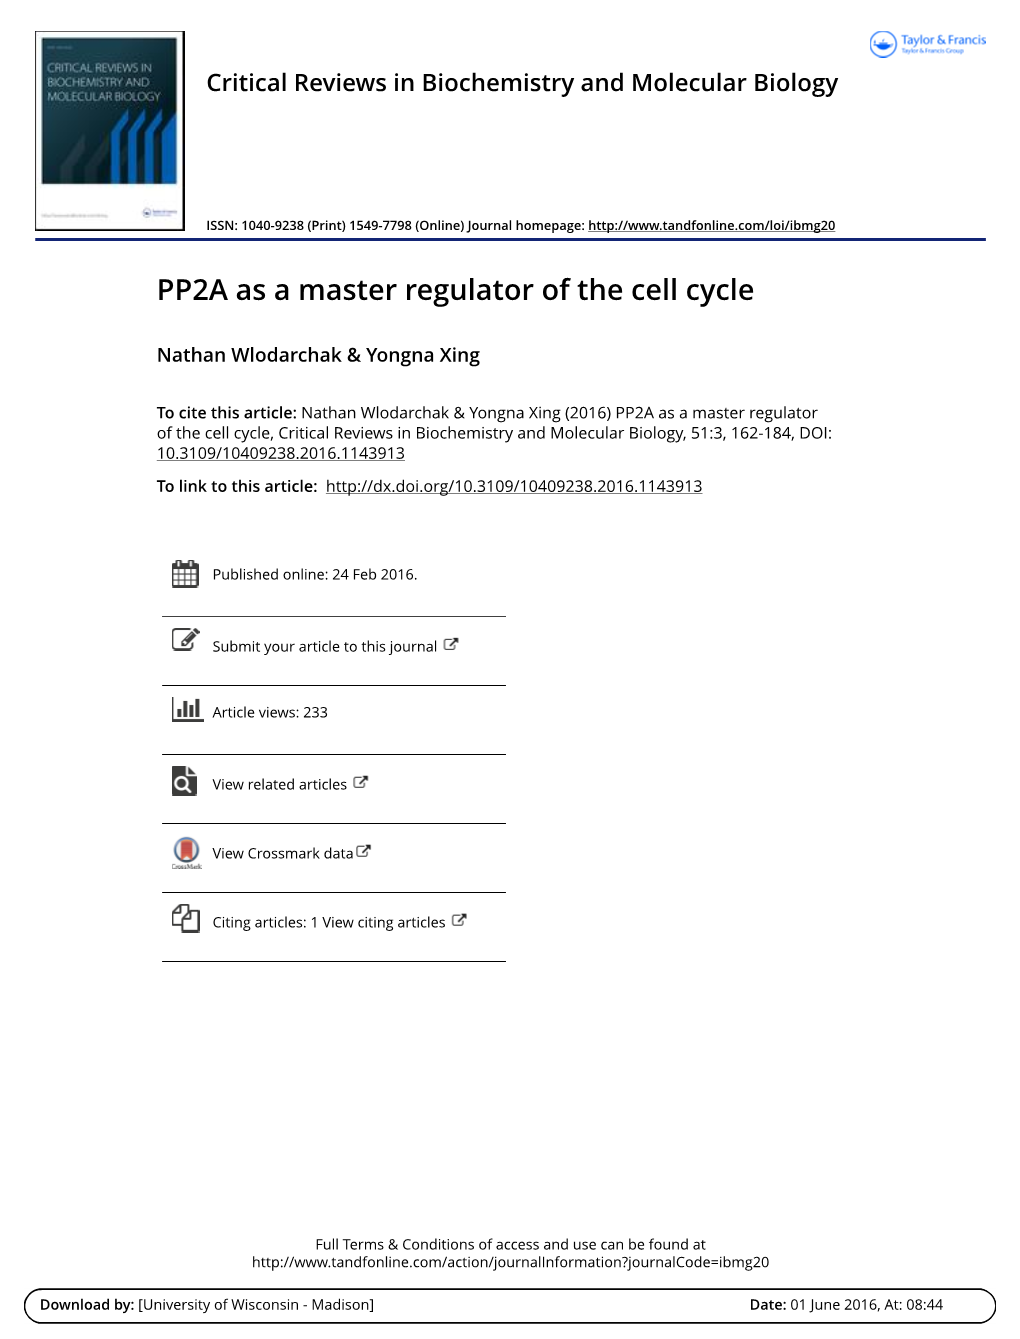 PP2A As a Master Regulator of the Cell Cycle